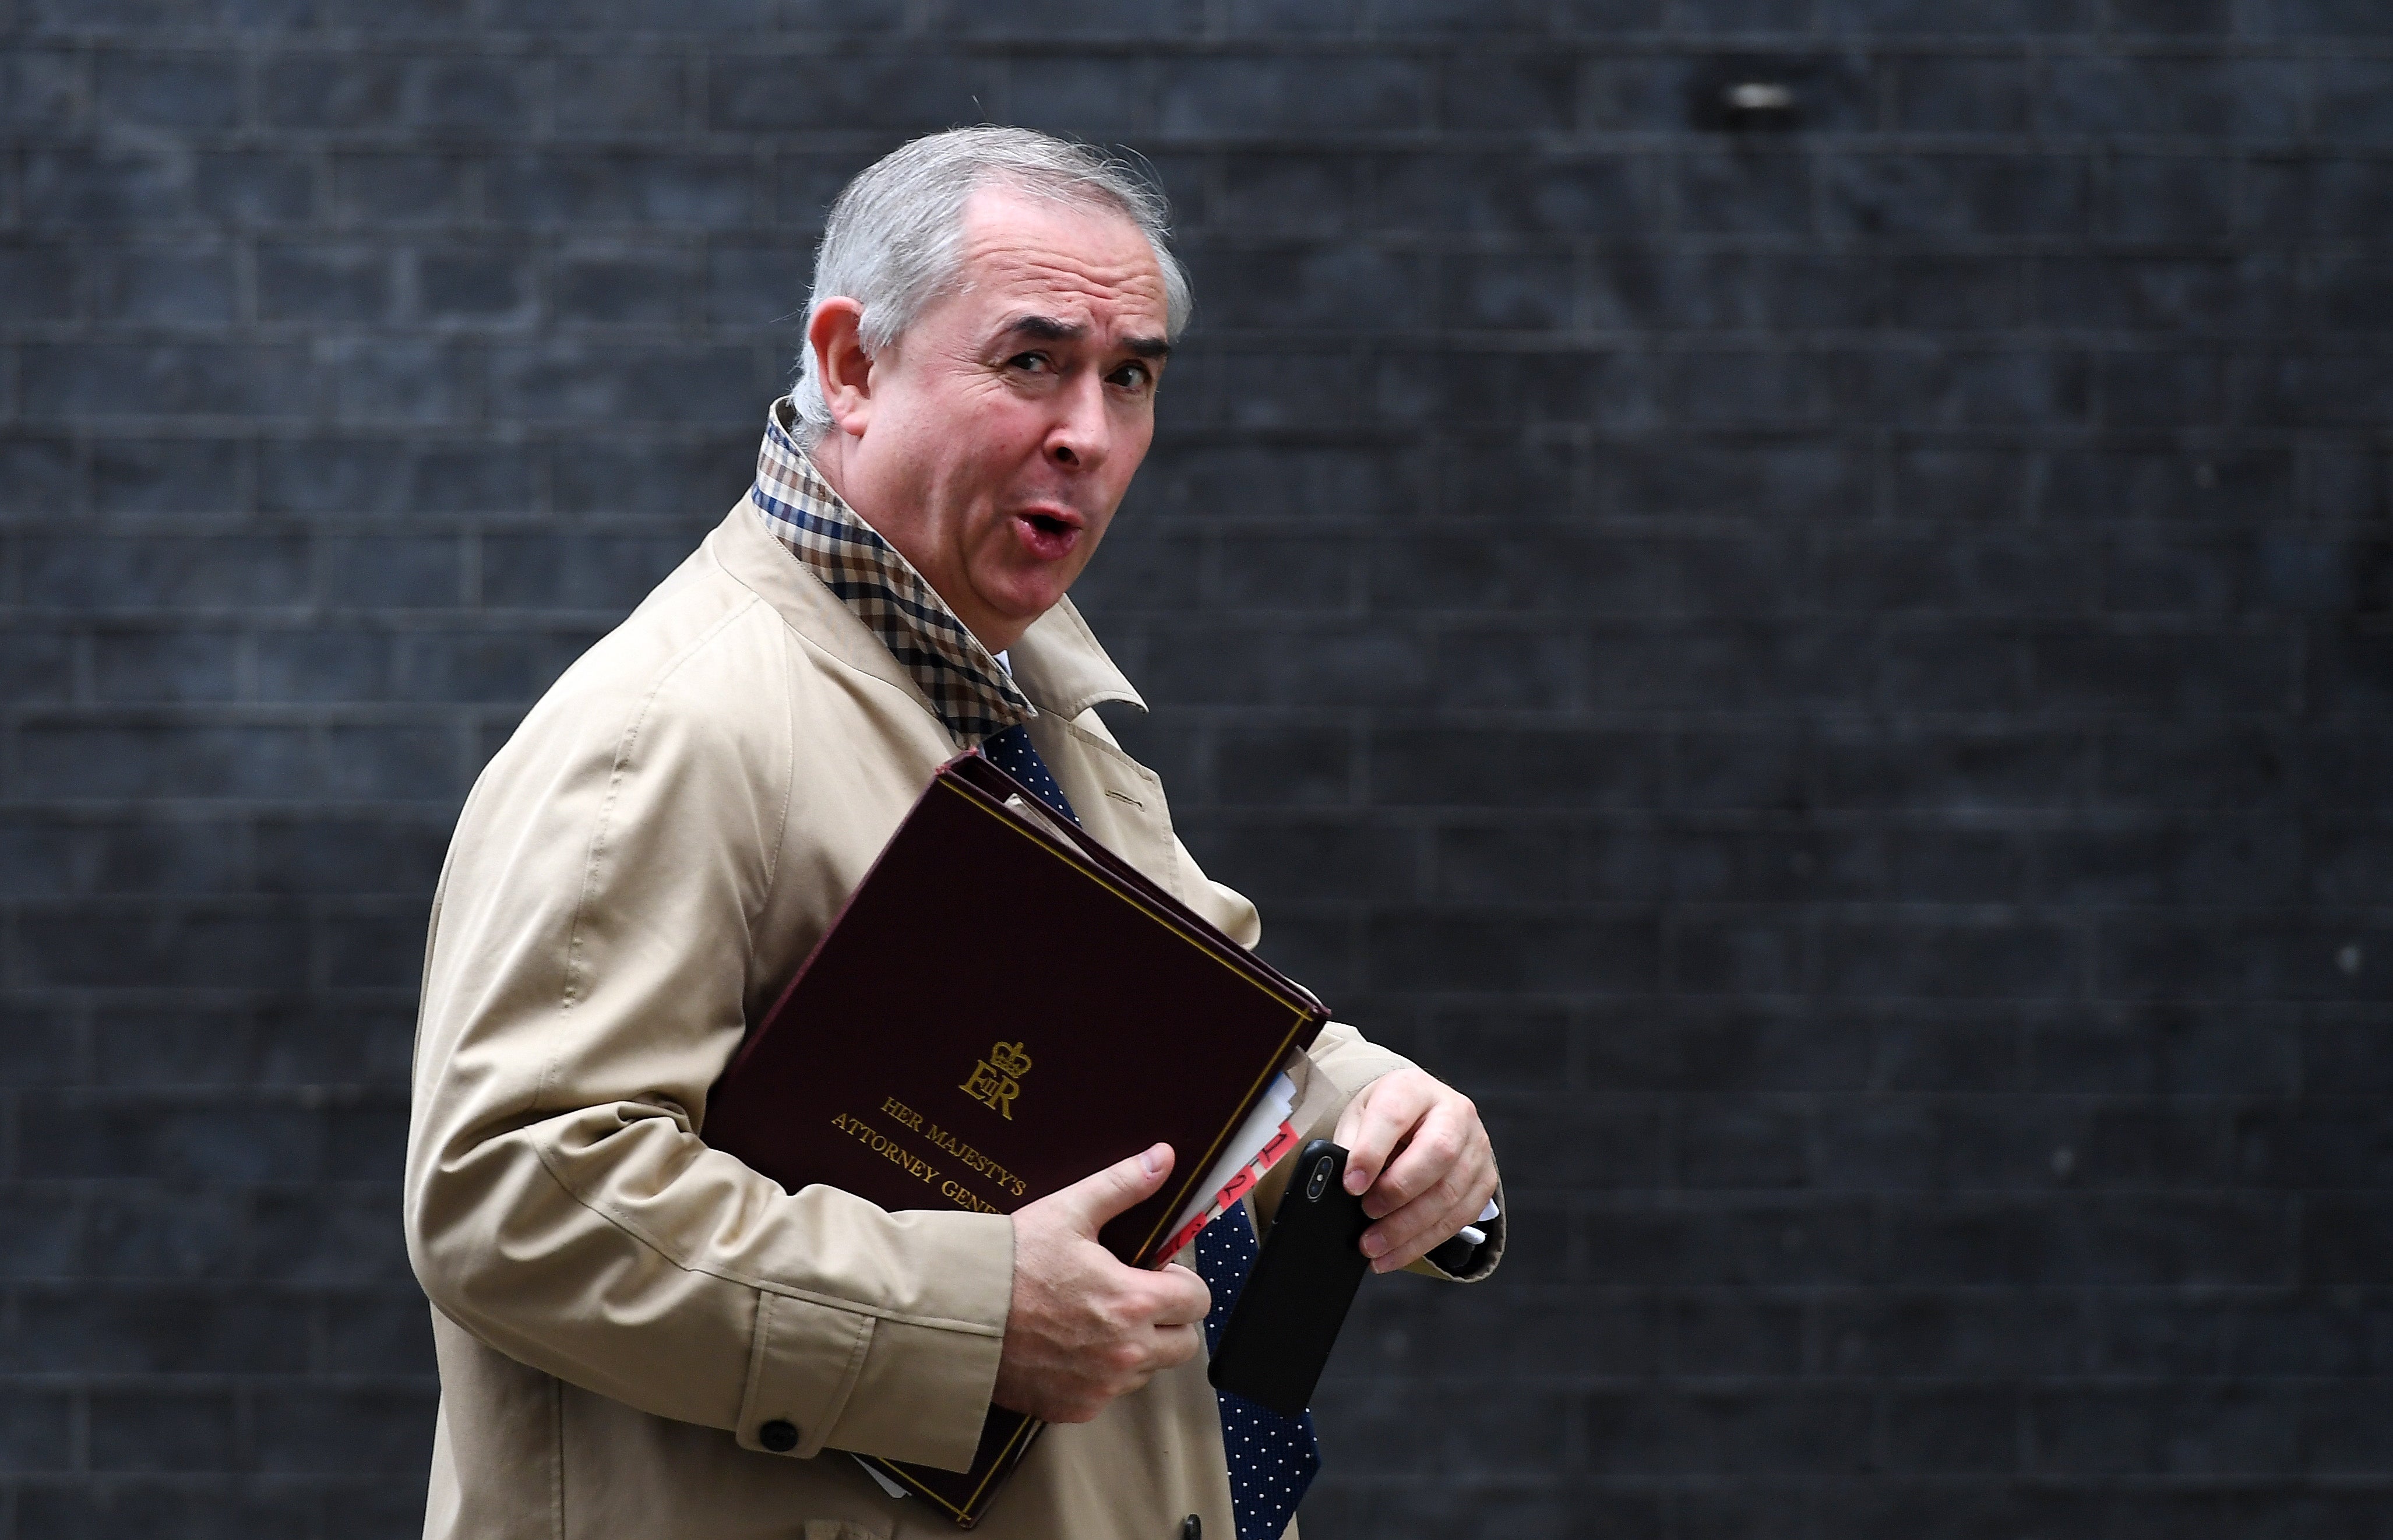 Geoffrey Cox departs a cabinet meeting at 10 Downing Street